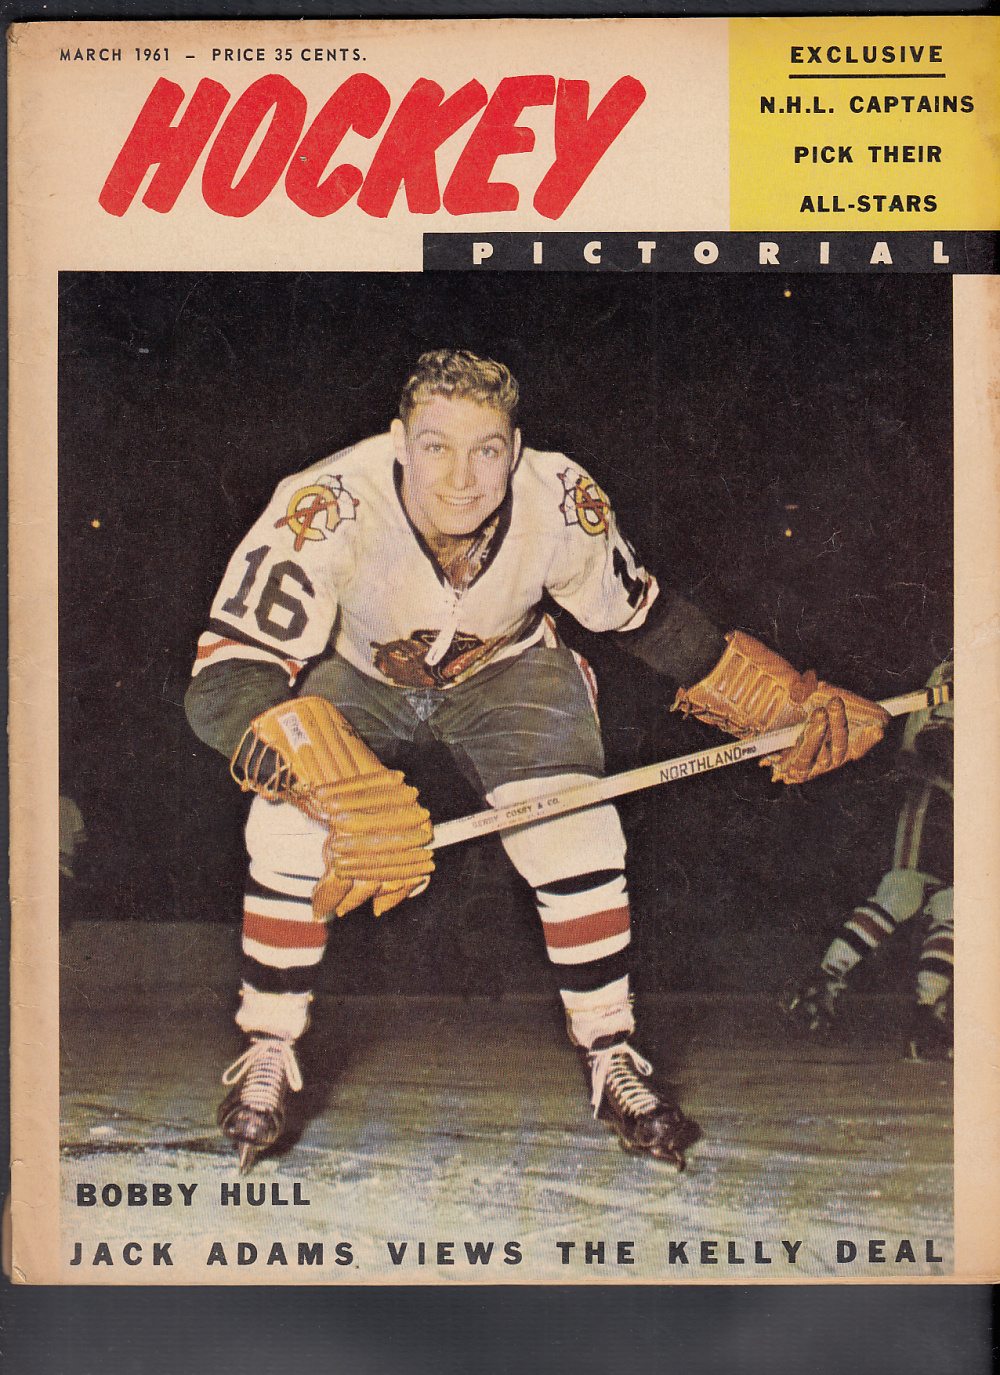 1961 HOCKEY PICTORIAL MAGAZINE B. HULL ON COVER photo